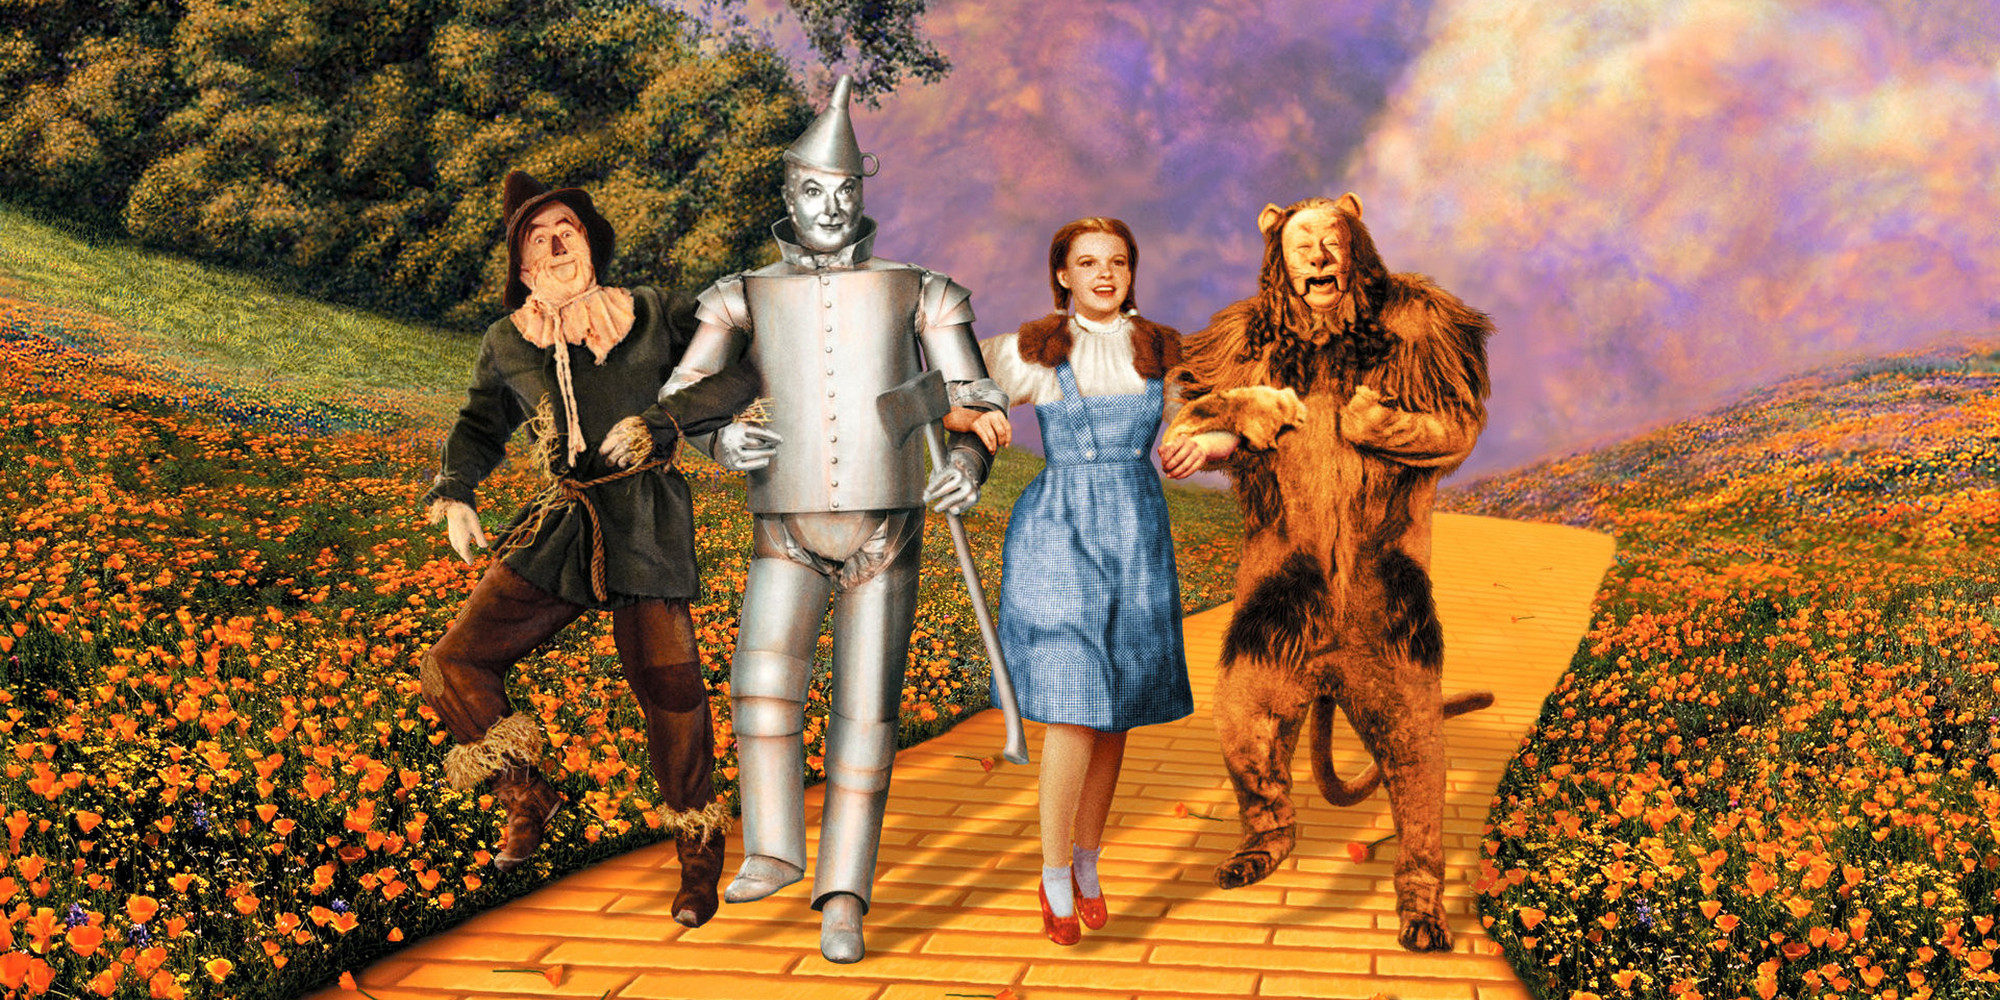 Poster from original 'The Wizard of Oz' film